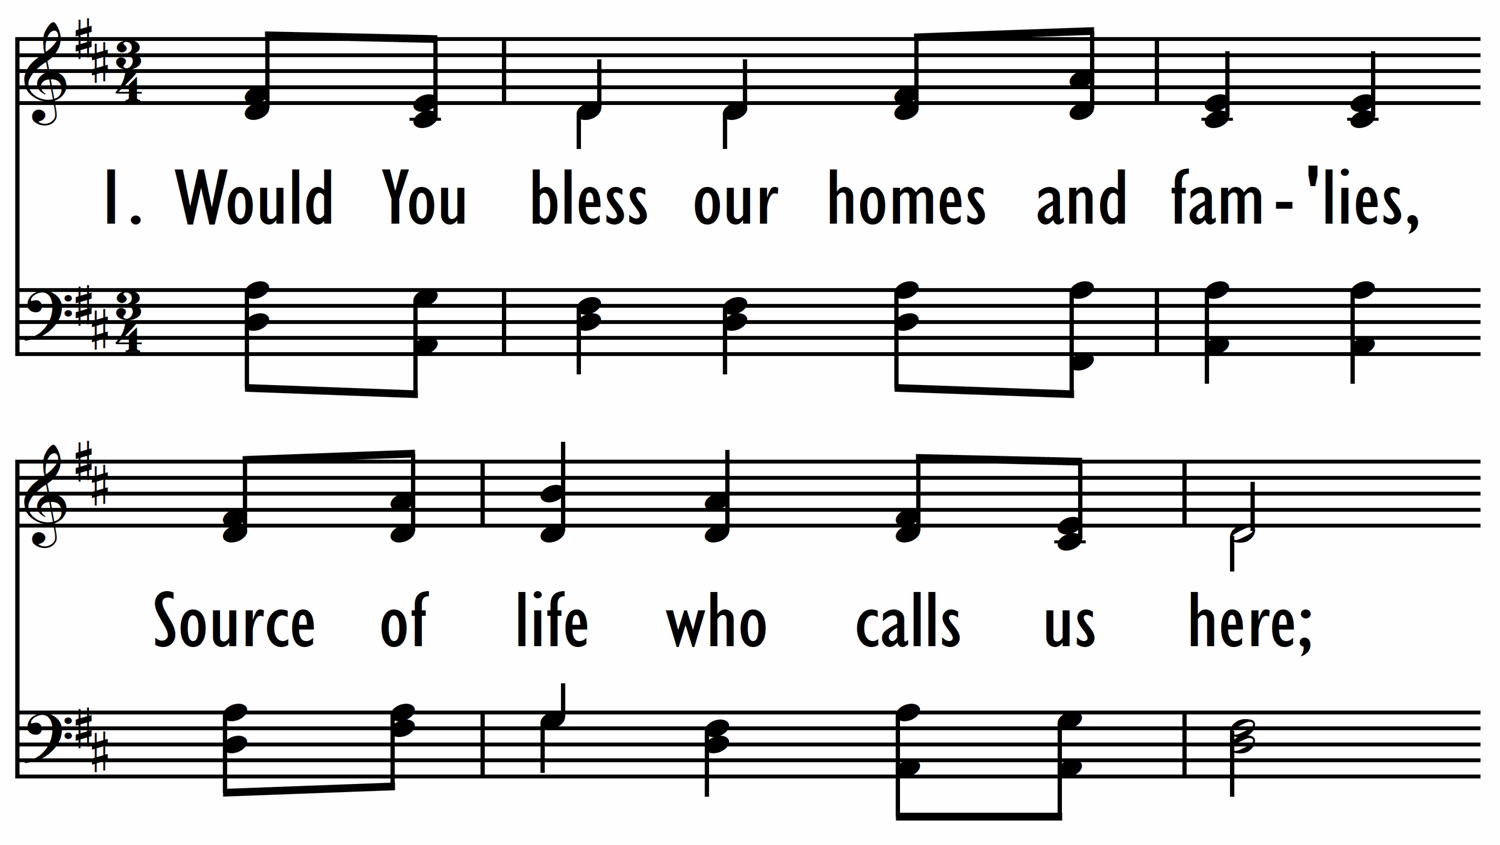 WOULD YOU BLESS OUR HOMES AND FAMILIES-ppt